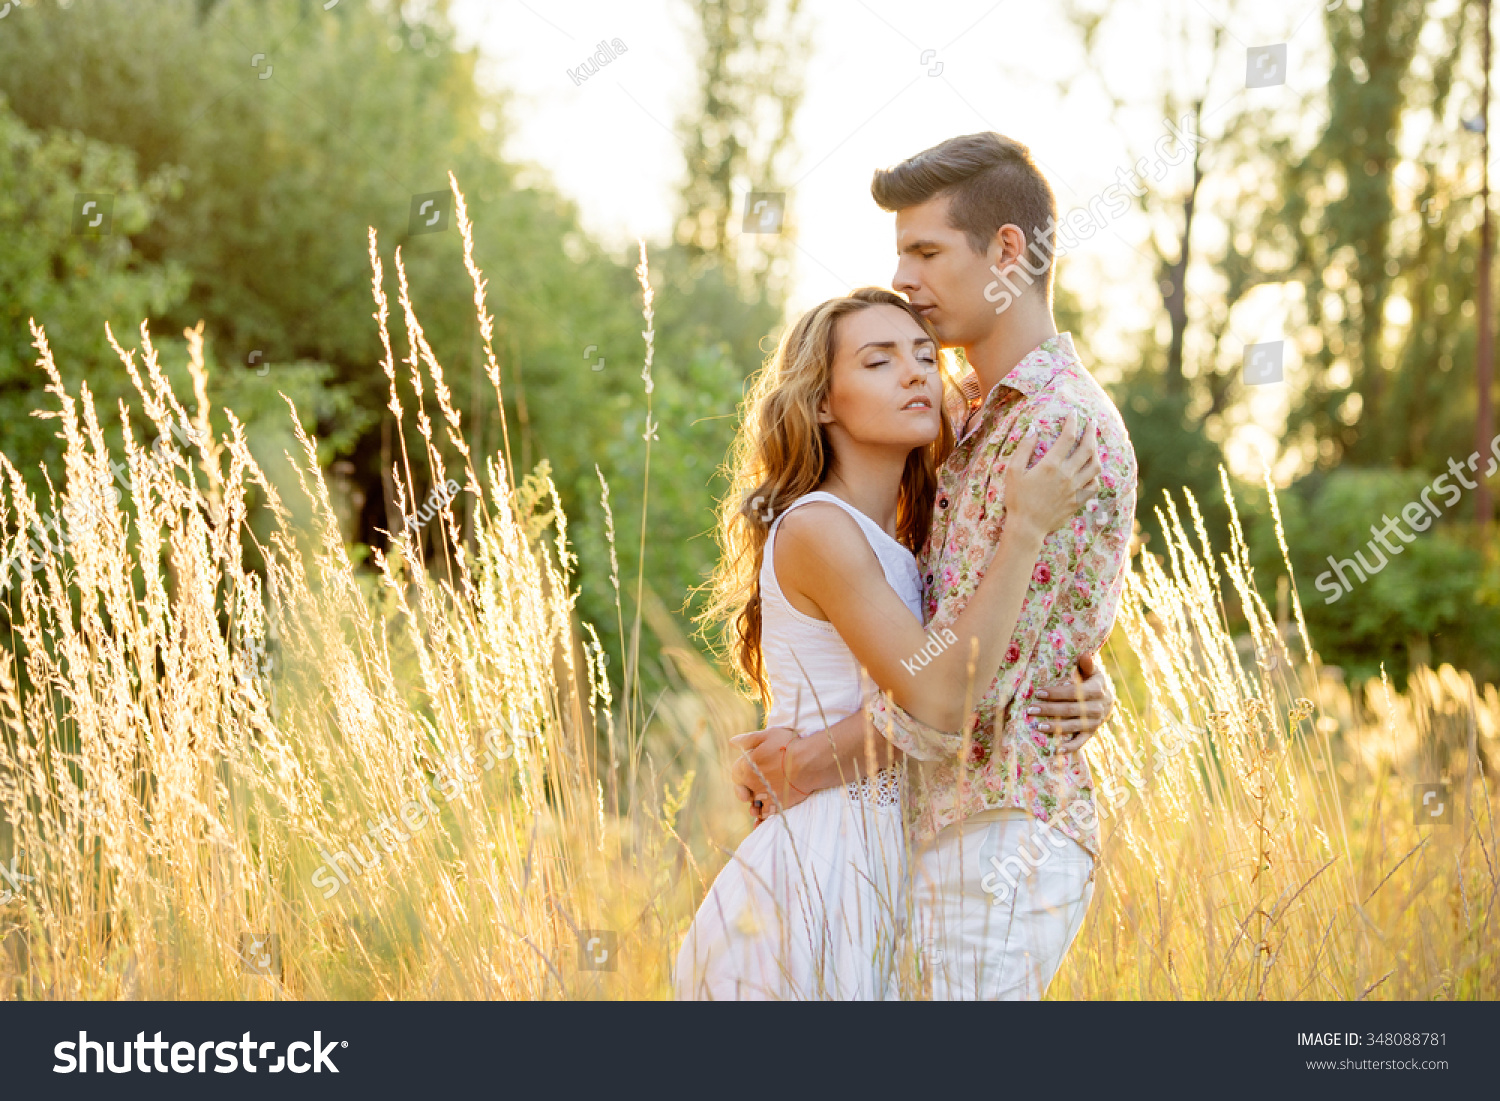 Love And Romance Outdoor Portrait Of Beautiful Loving Couple Embracing